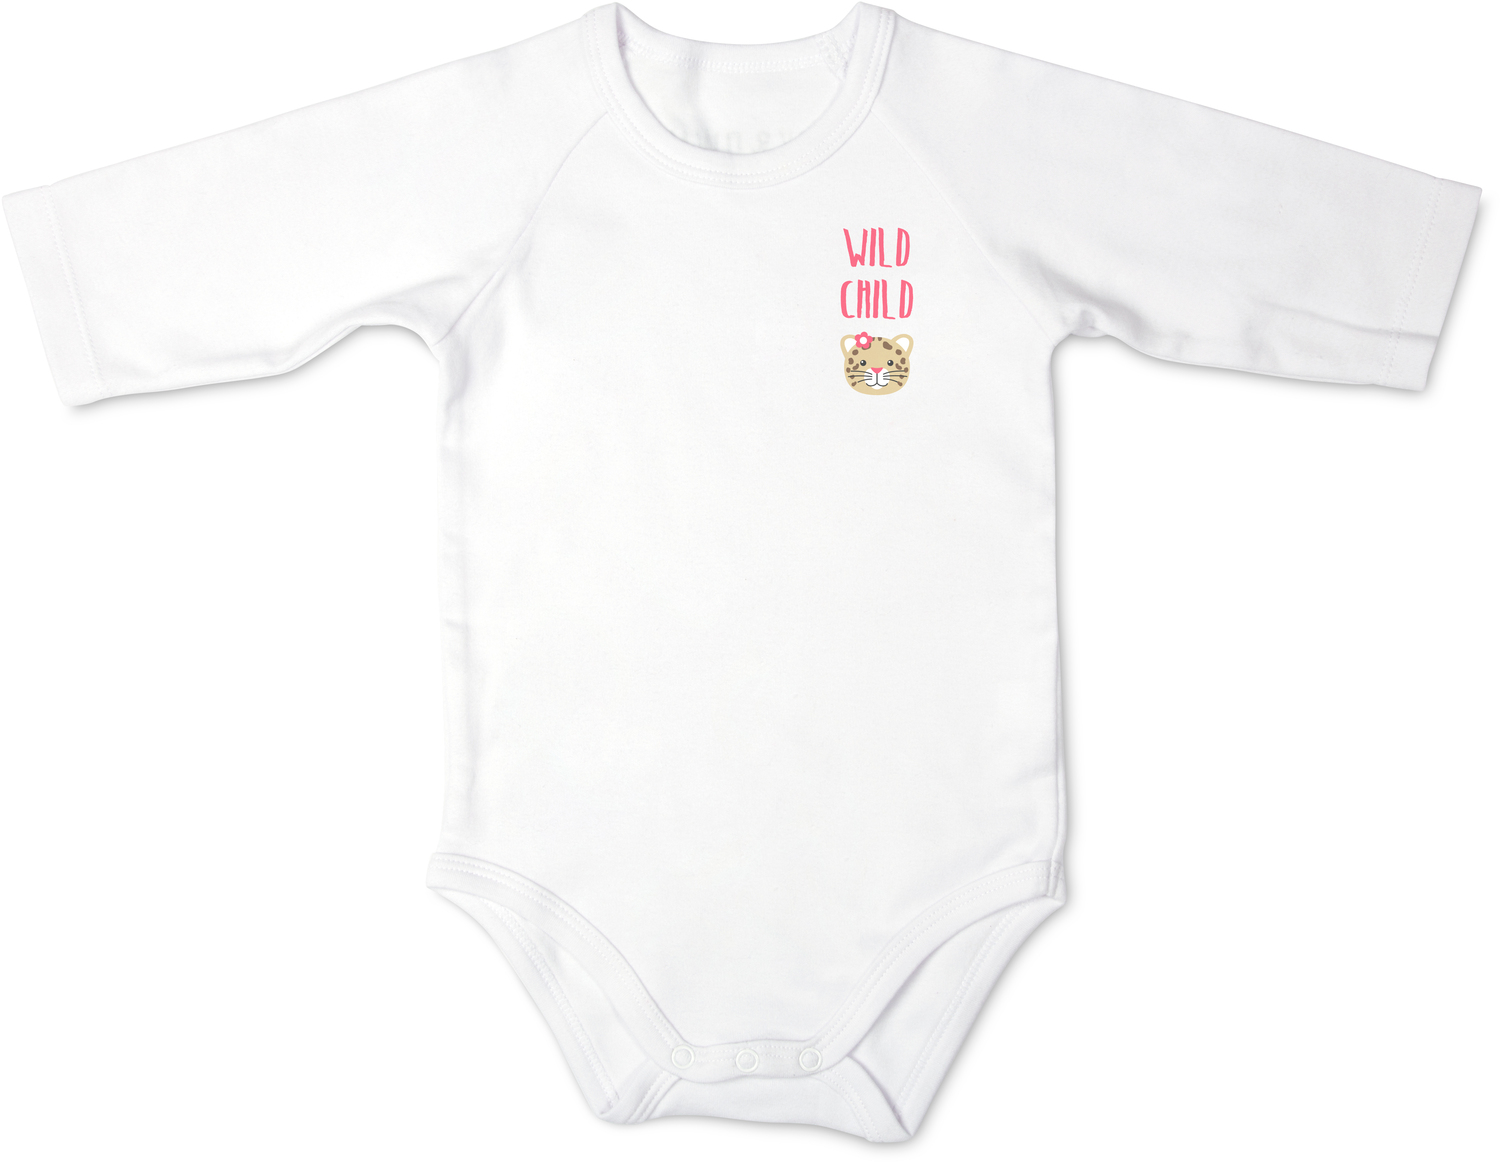 Jungle Cat by Izzy & Owie - Jungle Cat - 12-24 Months 3/4 Length Sleeve Onesie